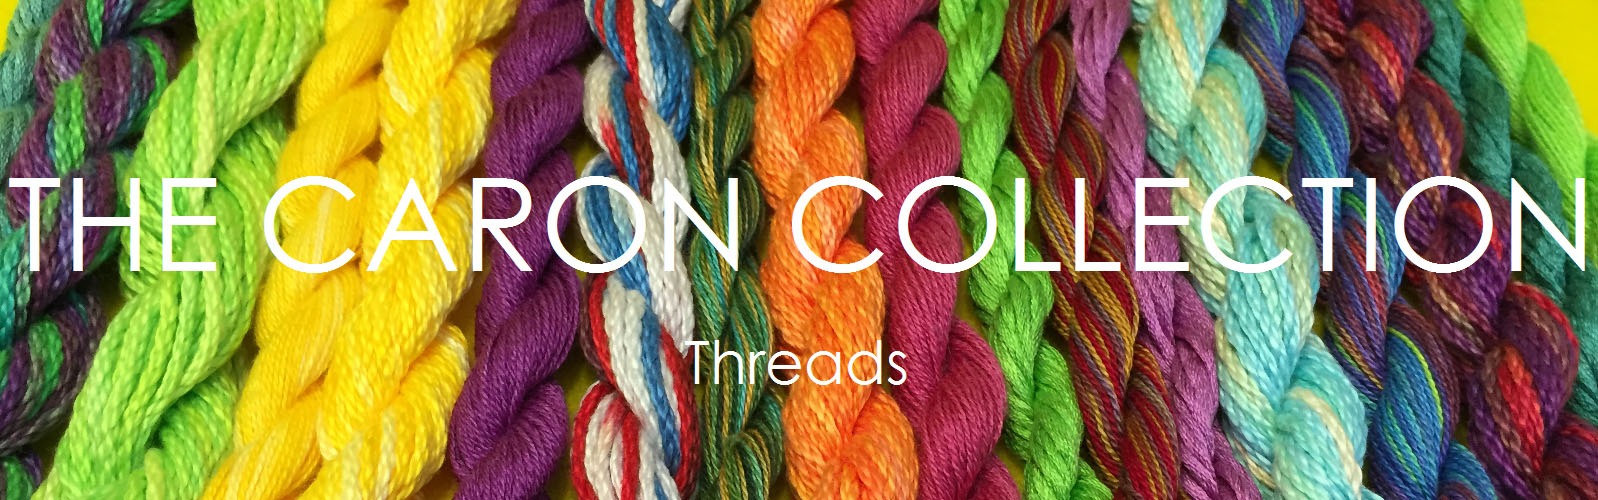 This wonderful selection of hand dyed threads in Cotton, Silk and Silk/Wool mix will give new meaning to your embroidery